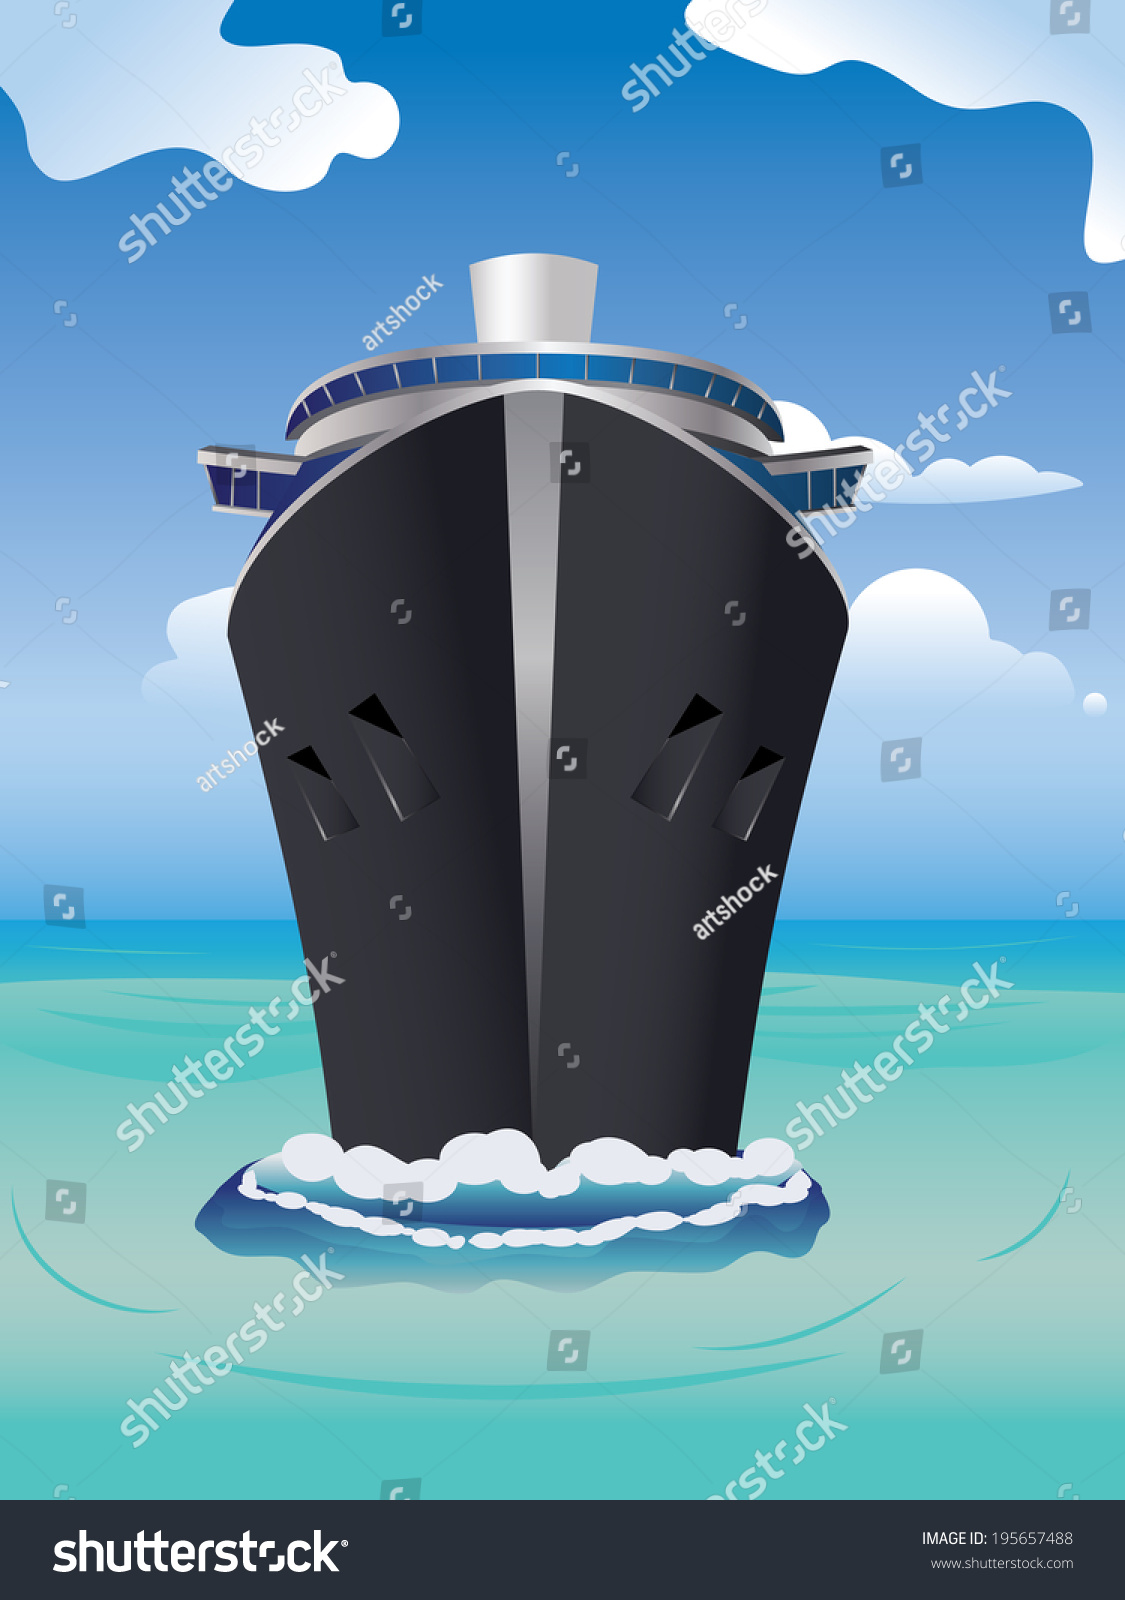 SVG of Luxury cruise ship, view from front at water level on a clear day with tropic seas and blue sky. svg